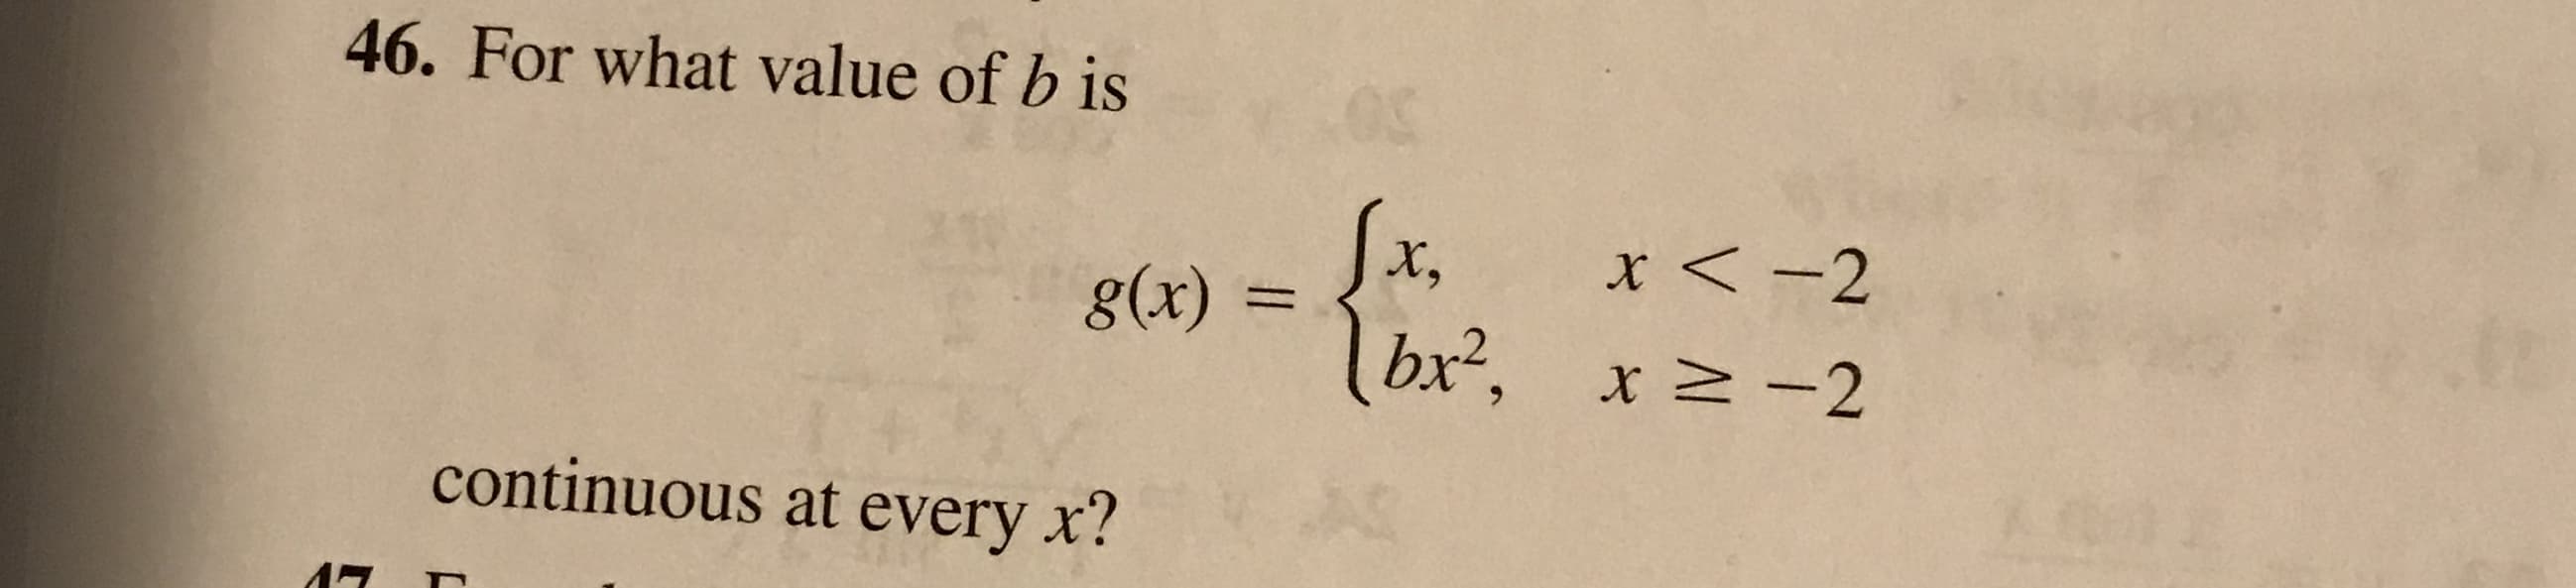 46. For what value of b is
0
Jx.
bx2, x -2
x<-2
g(x) =
A0
continuous at every x?
